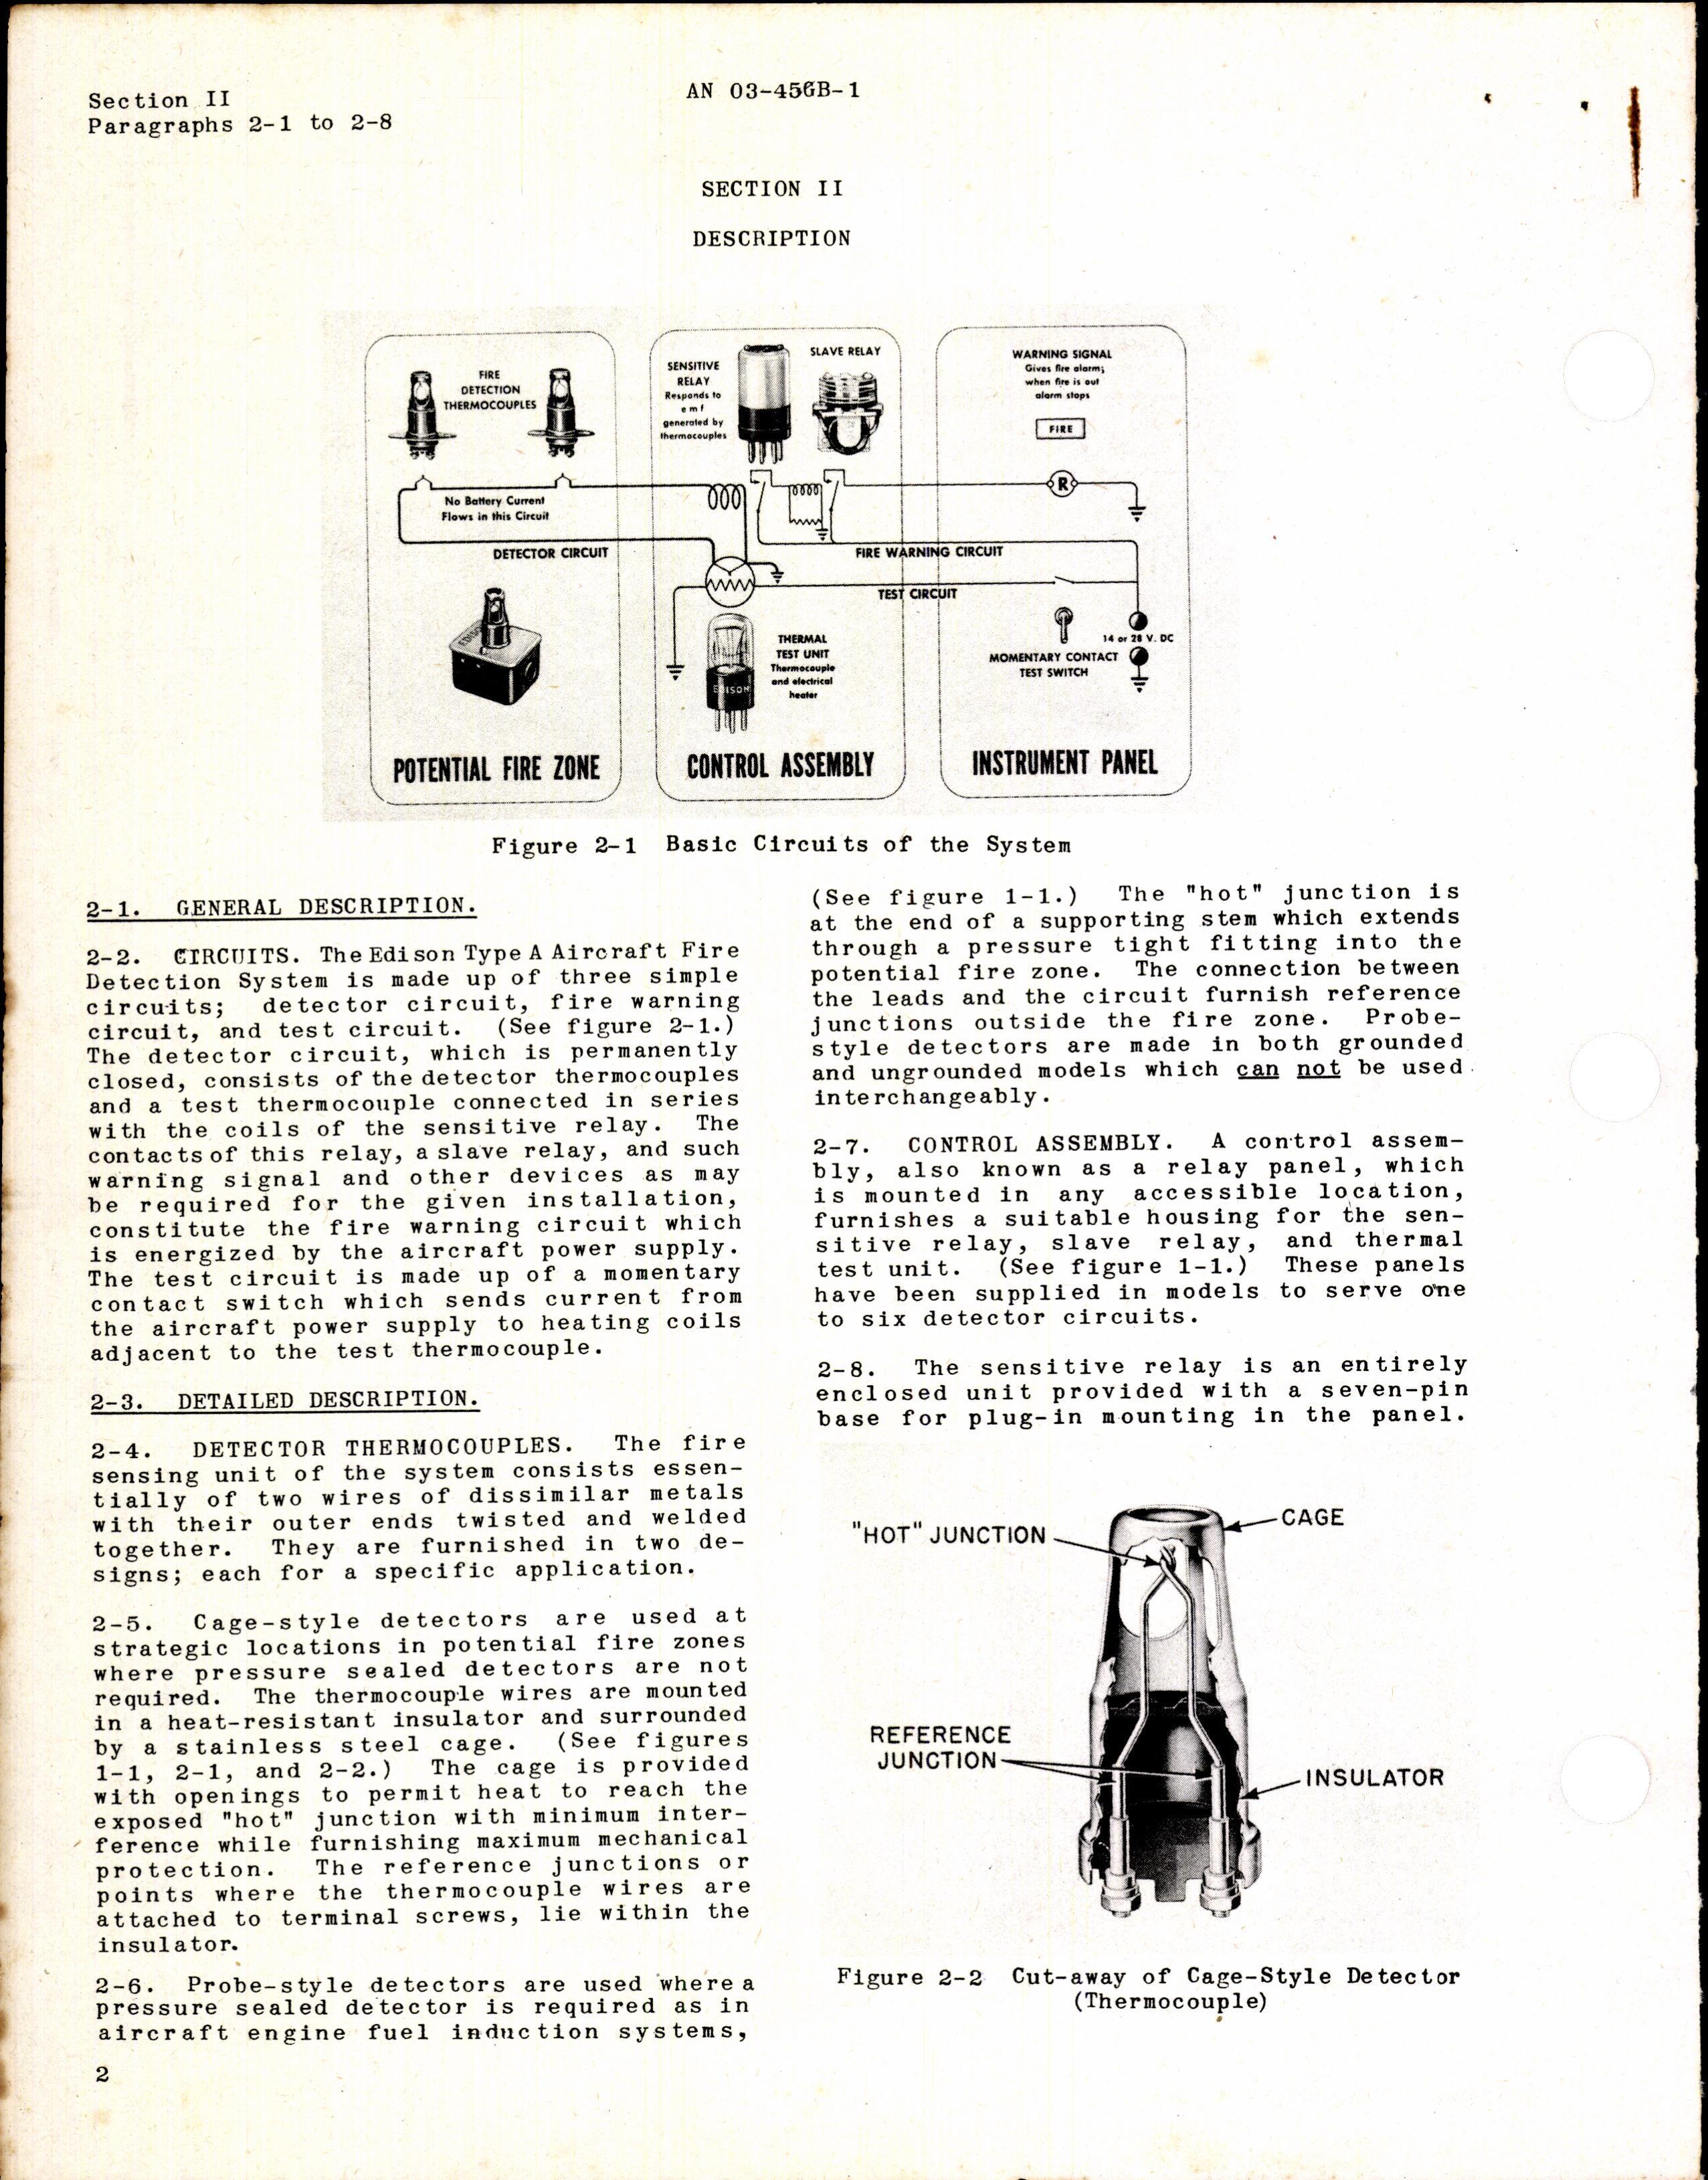 Sample page 4 from AirCorps Library document: Overhaul Instructions for Aircraft Fire Detection System Type A